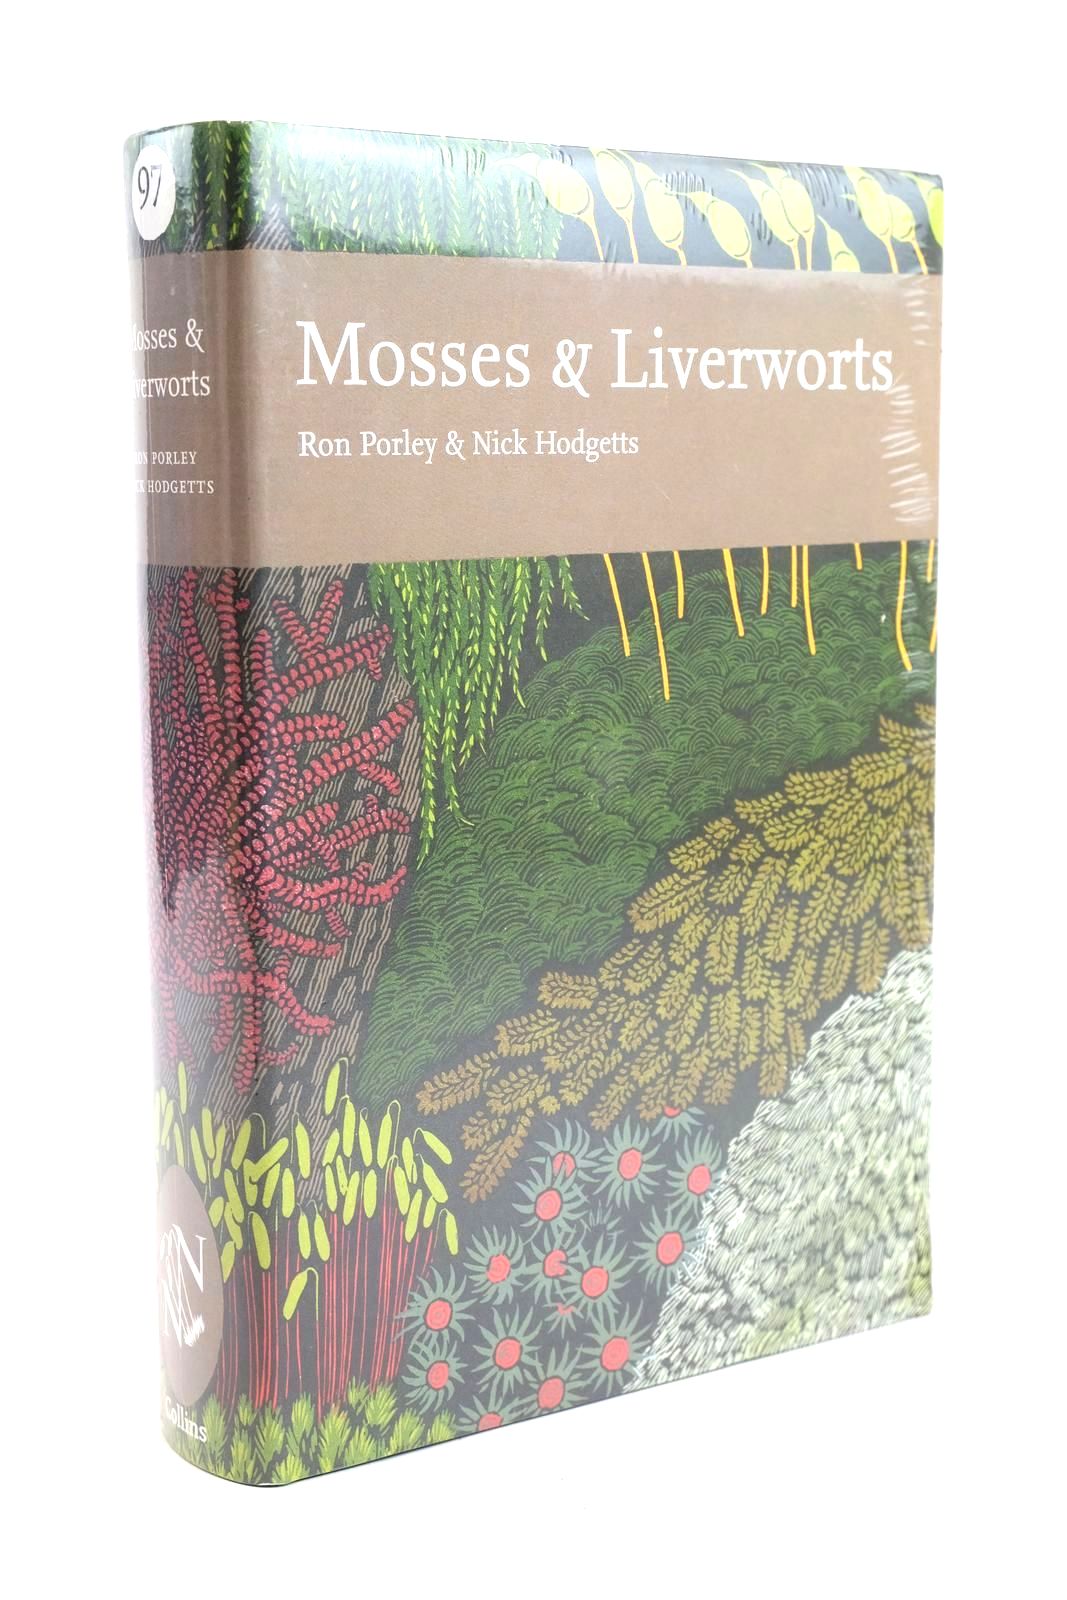 Photo of MOSSES &AMP; LIVERWORTS (NN 97) written by Porley, Ron Hodgetts, Nick published by Collins (STOCK CODE: 1320405)  for sale by Stella & Rose's Books